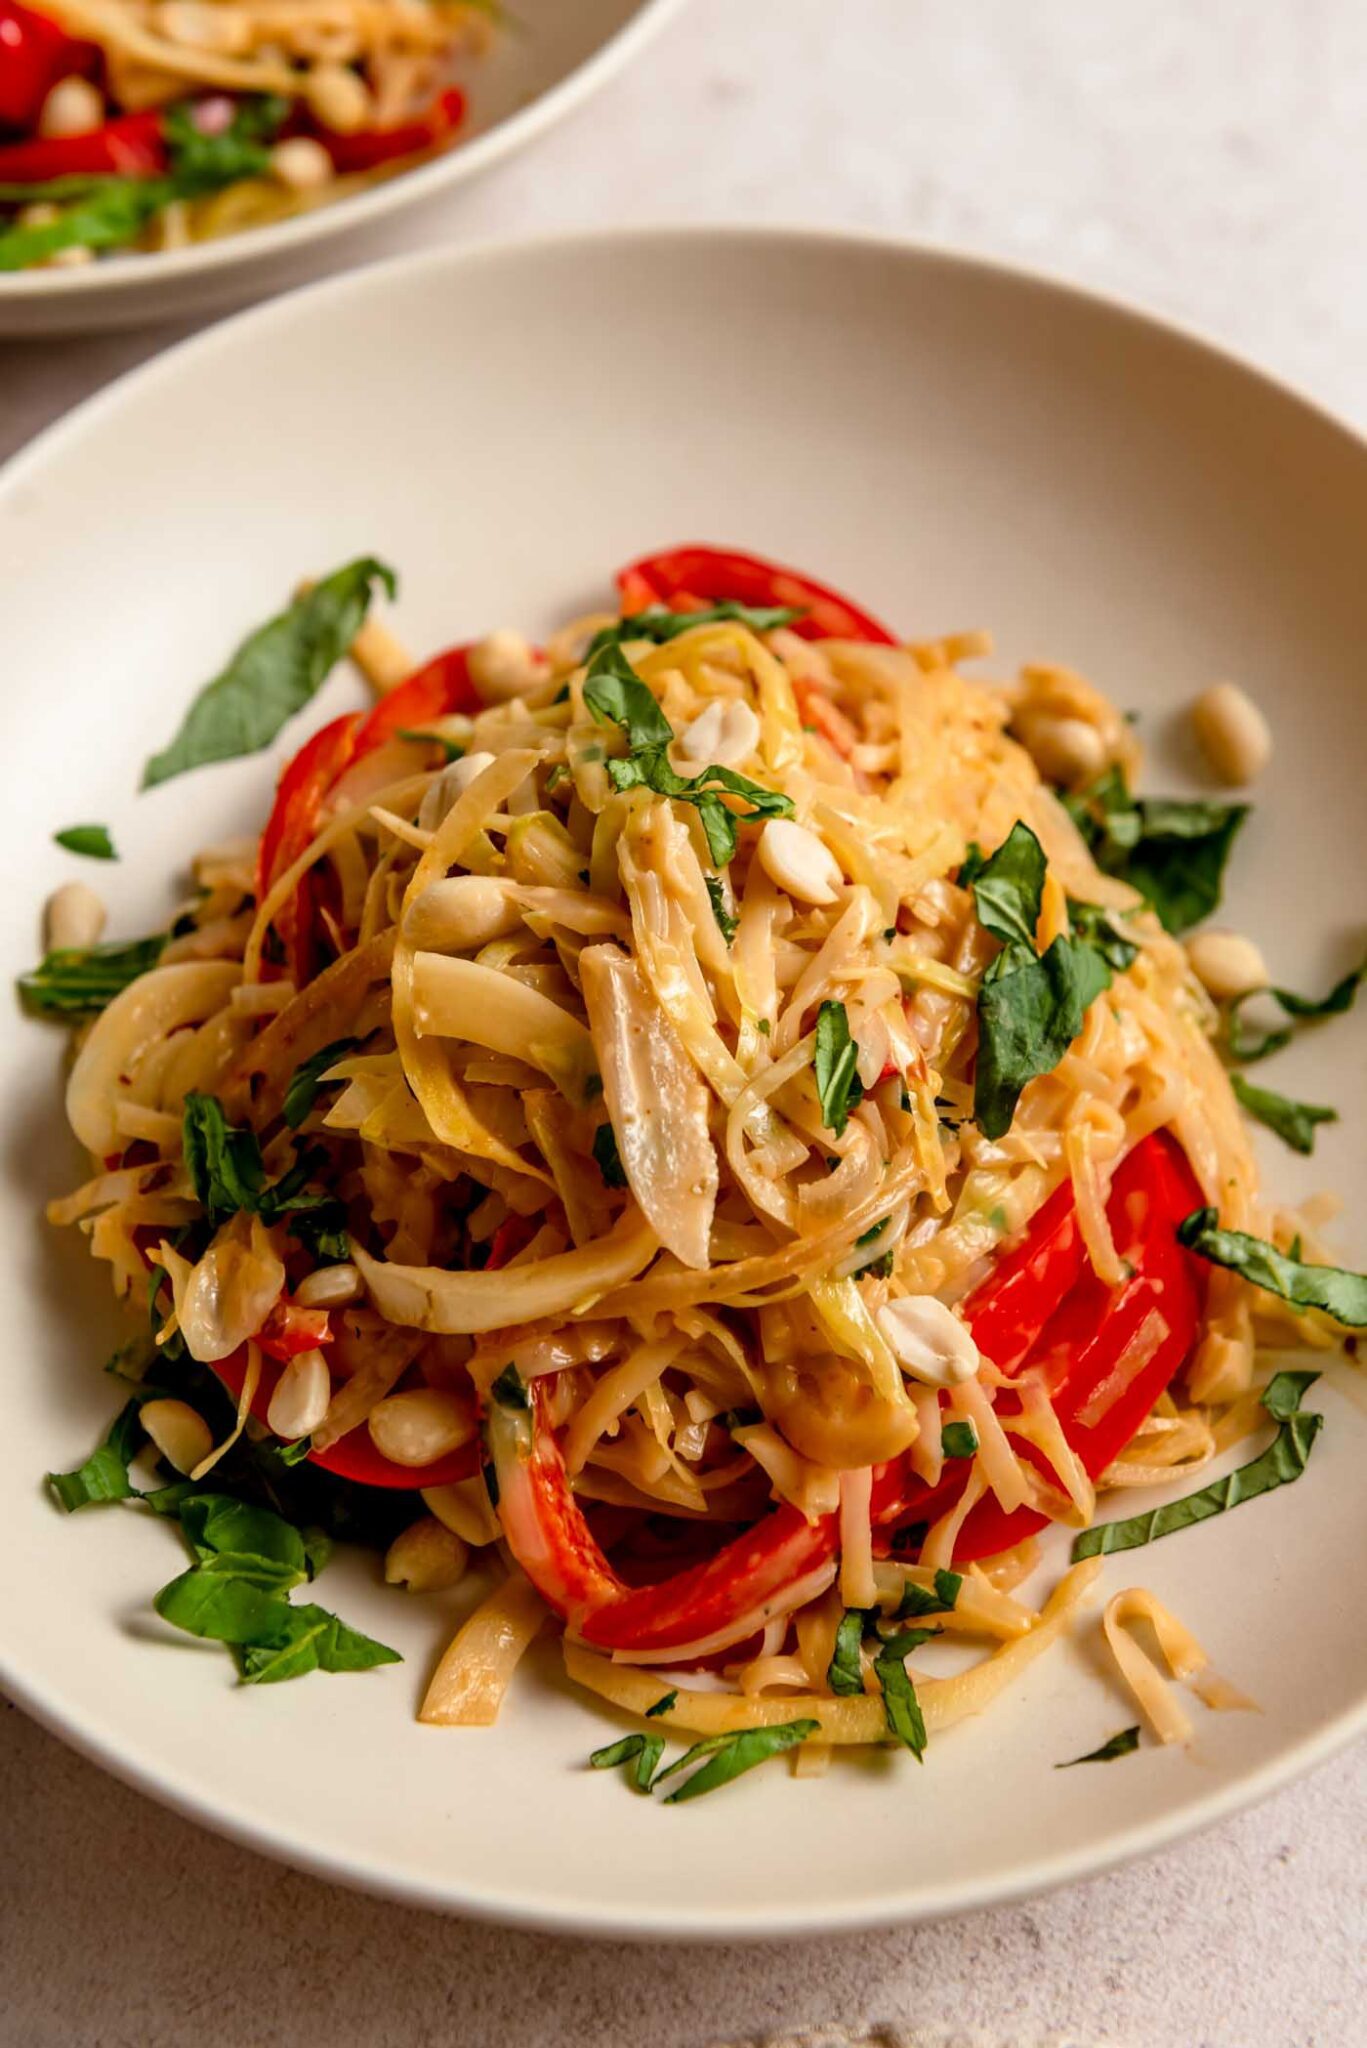 Thai Curry Noodles Recipe - Running on Real Food